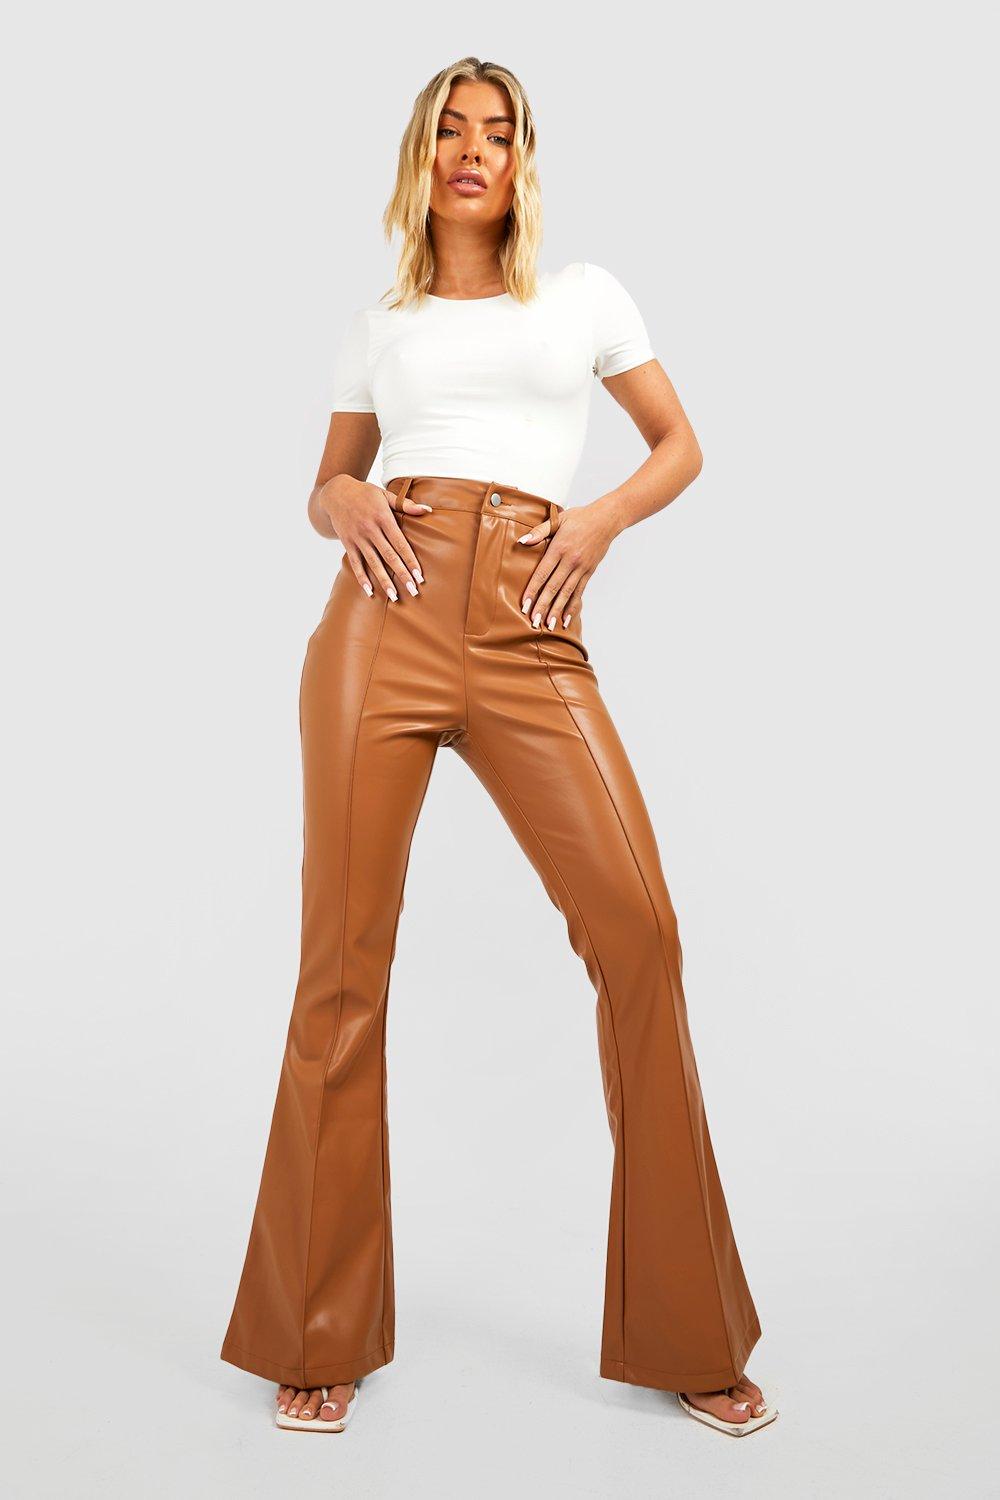 prieel Gehuurd opvoeder Faux Leather Tailored High Waisted Flared Pants | boohoo